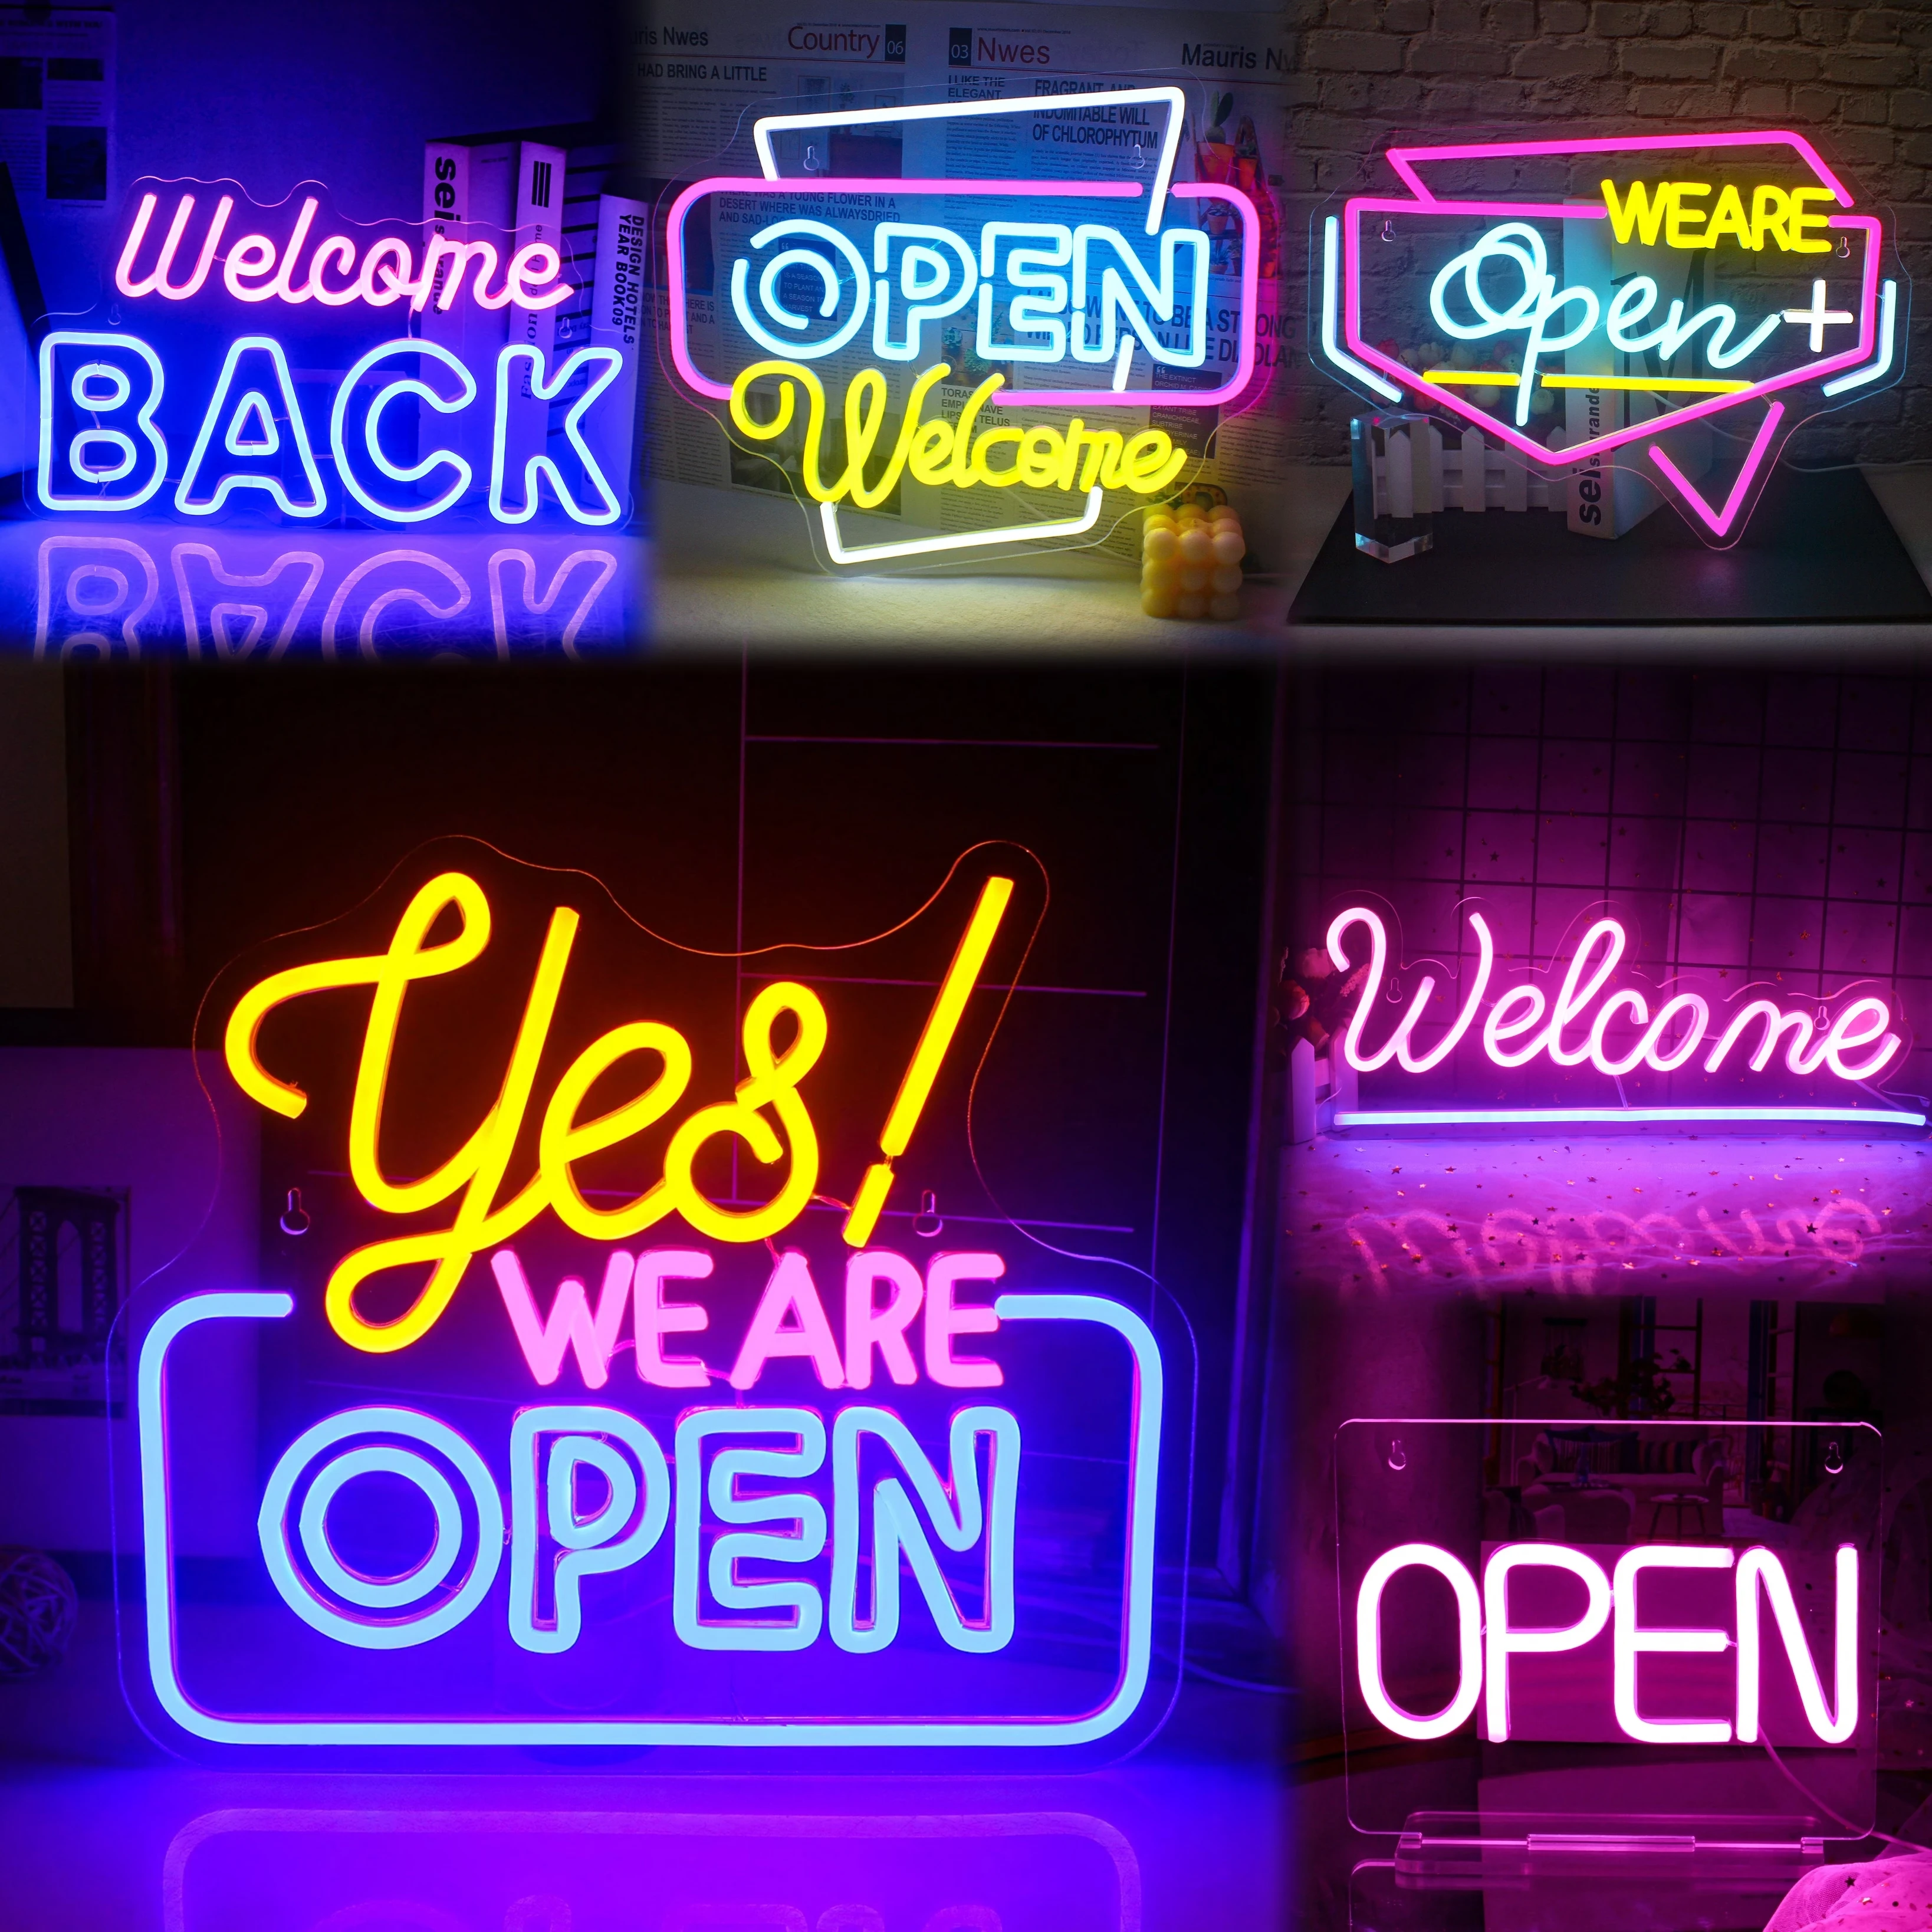 

Yes We Are Open Neon Sigh LED Hanging Wall Light For Shop Store Bar Club Bar Attractive Welcome Sighs Super Bright Lamp Wall Art